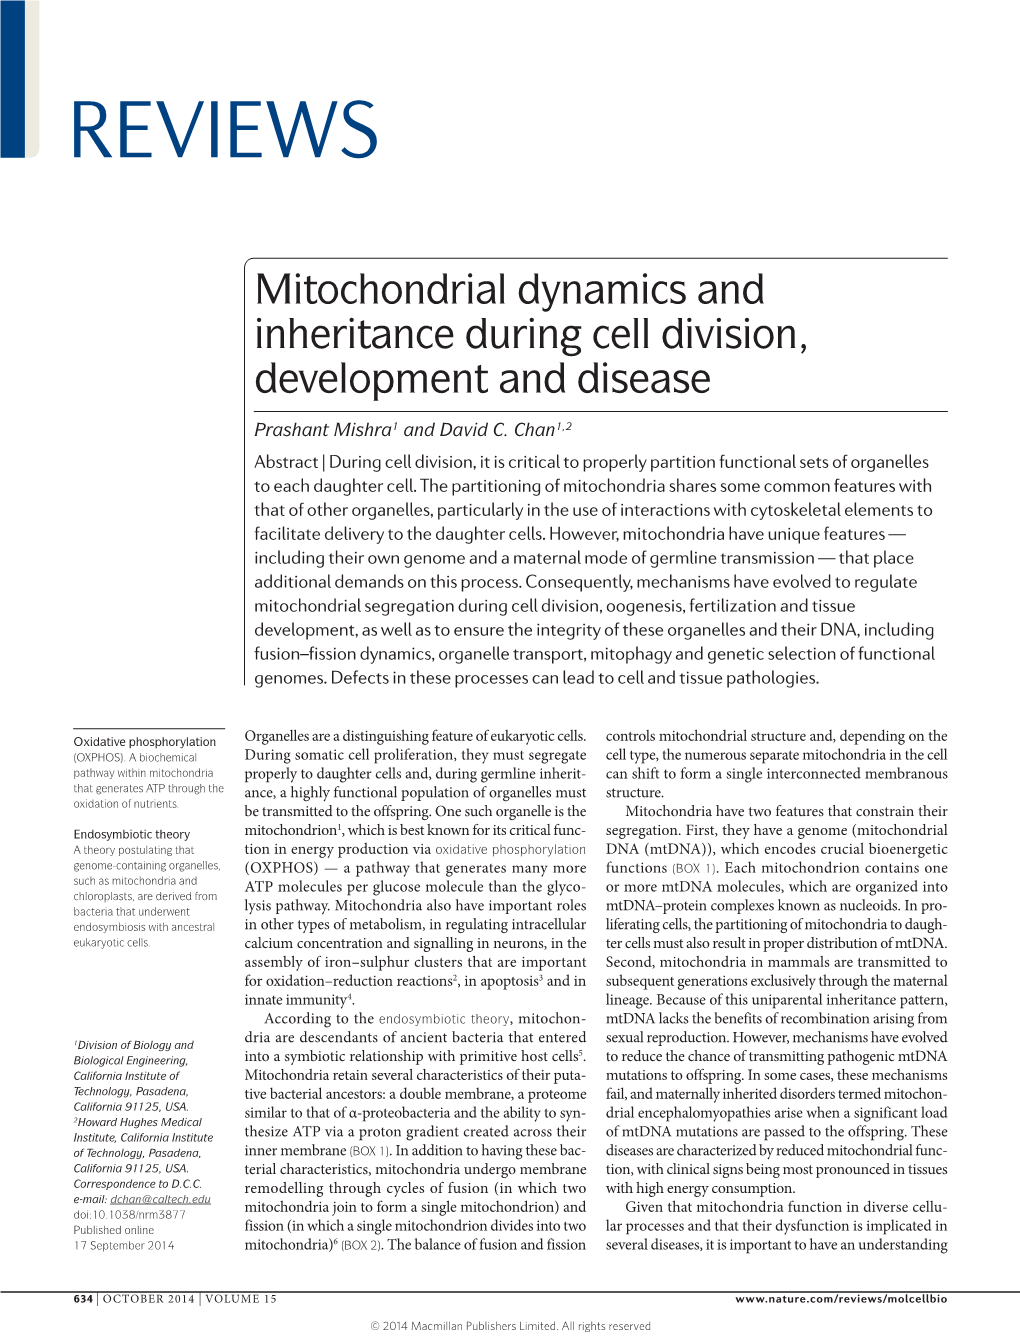 Mitochondrial Dynamics and Inheritance During Cell Division, Development and Disease